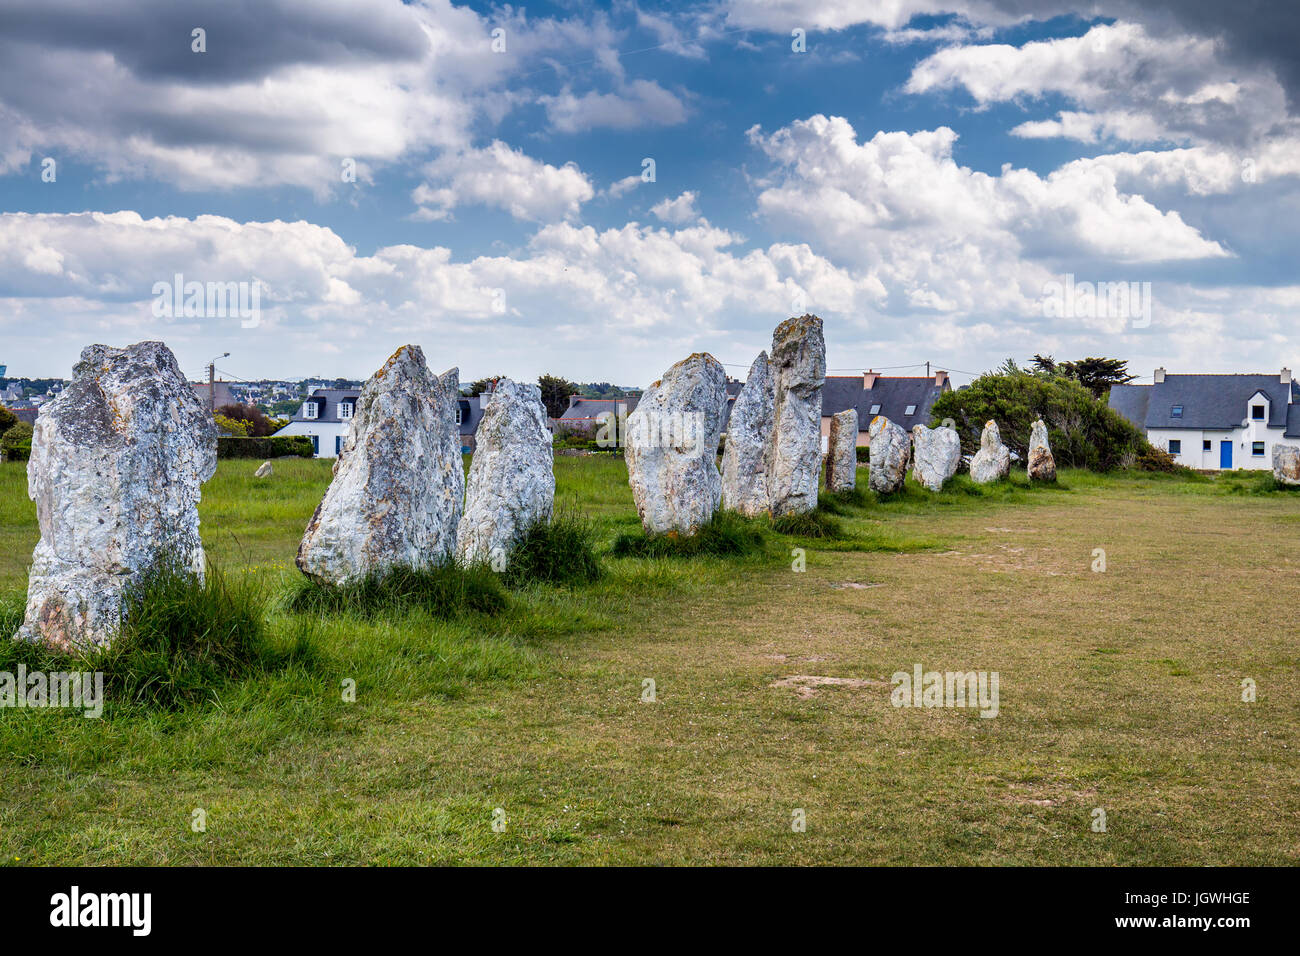 The alignment of standing stones known as Alignement de Menhirs de Lagatjar in the neighbourhoodl of Camaret-sur-Mer is an unmissable prehistoric site Stock Photo